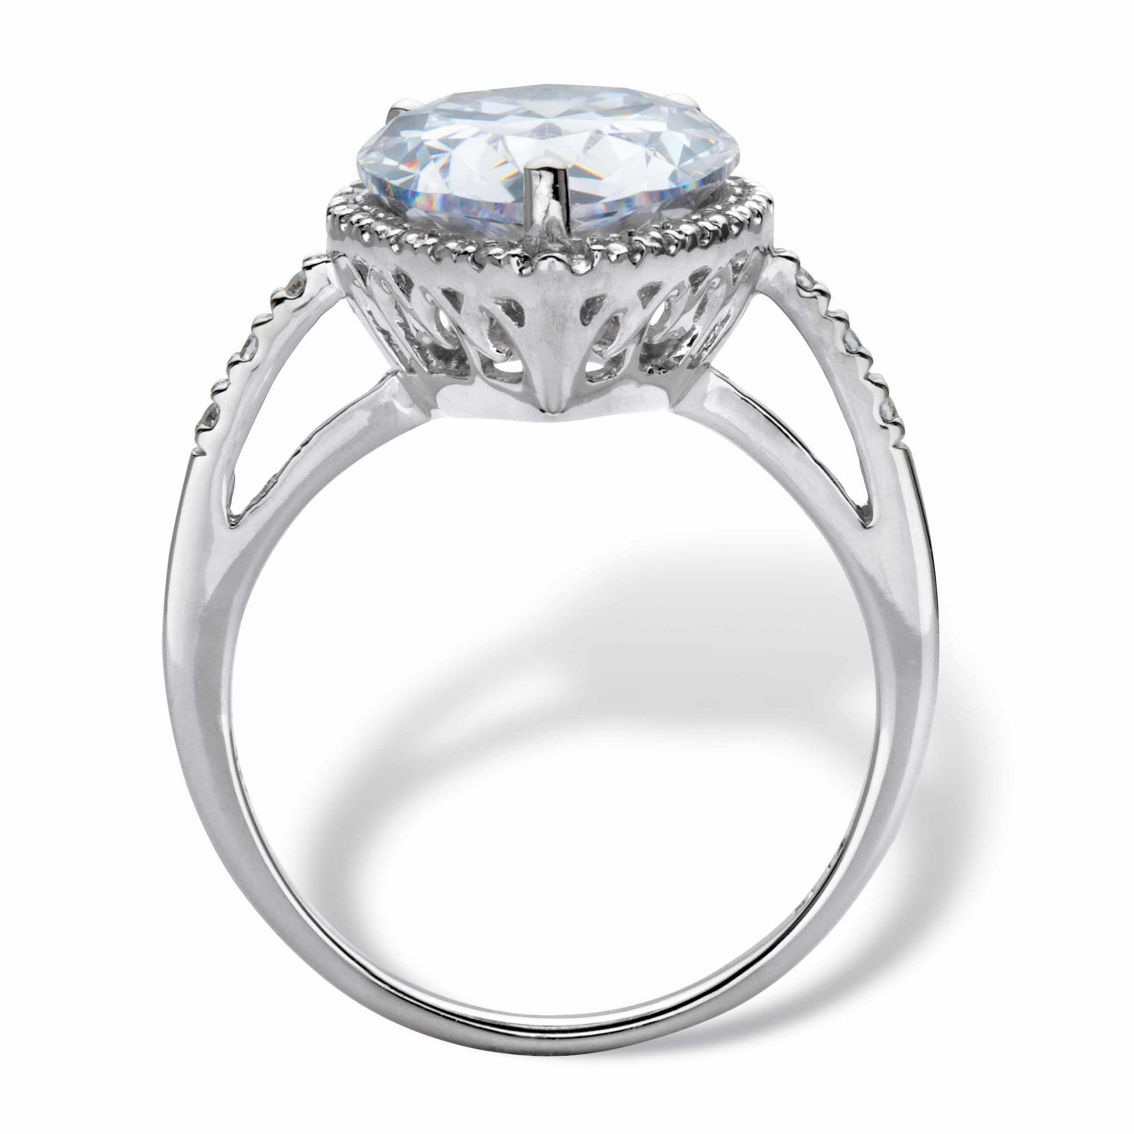 PalmBeach Pear-Cut Cubic Zirconia Platinum Over Silver Halo Engagement Ring - Image 2 of 5